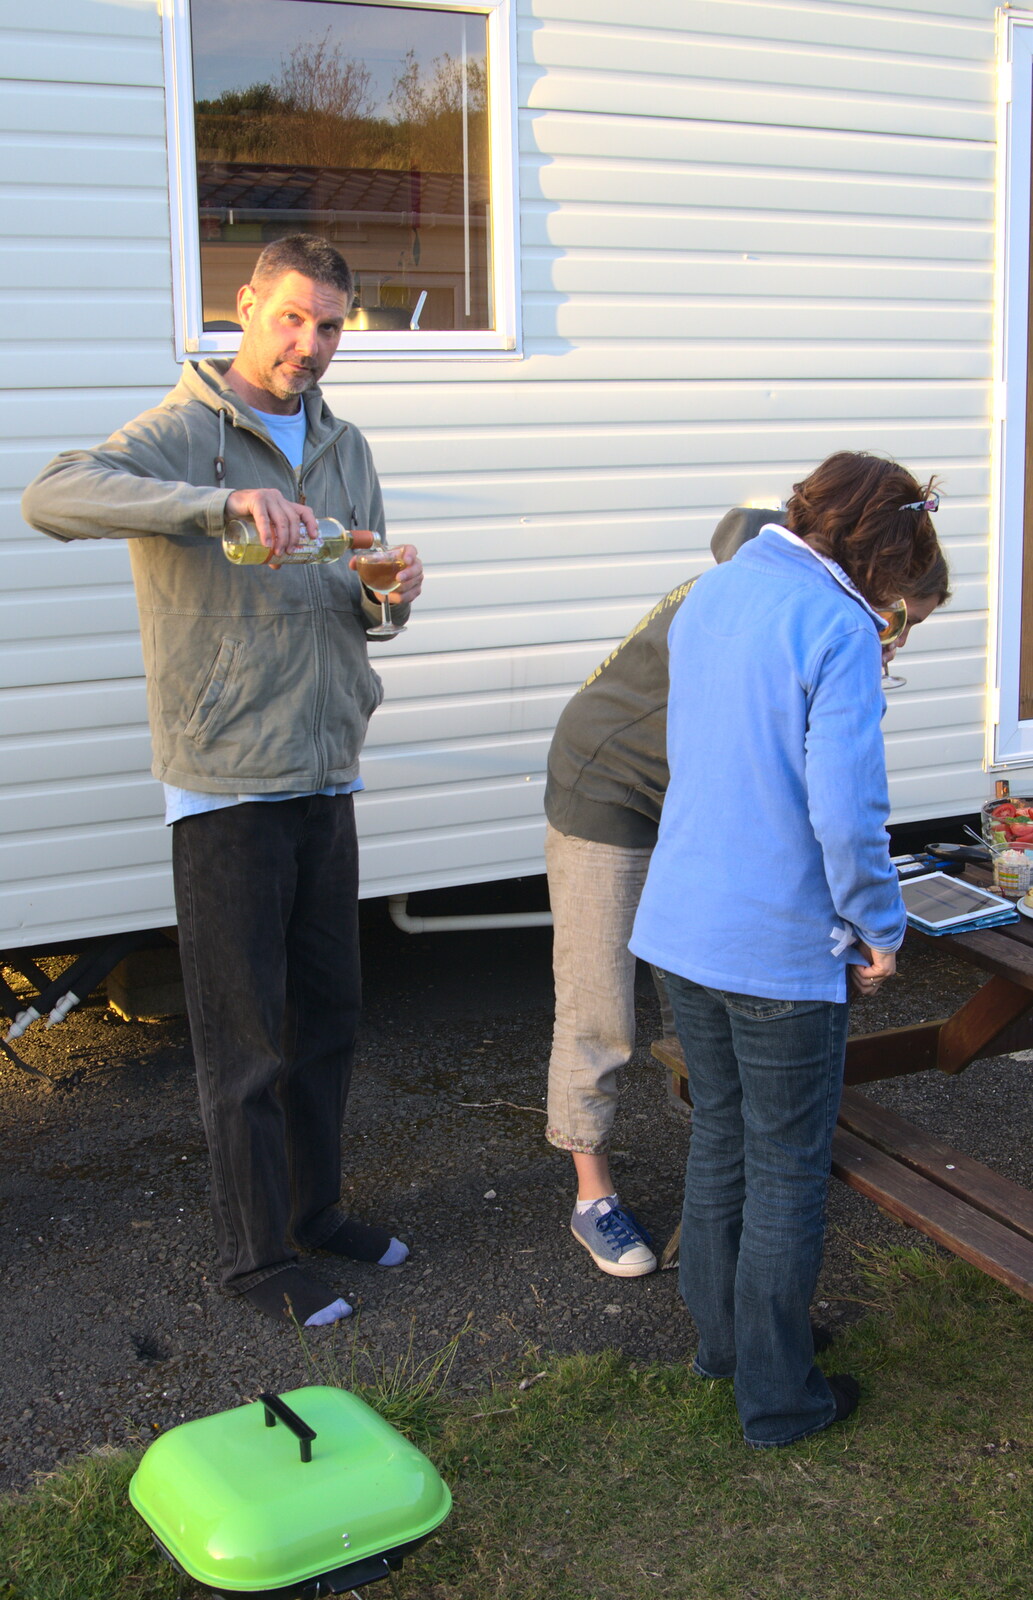 Sean pours a glass of wine from Camping With Sean, Ashburton, Devon - 8th August 2016